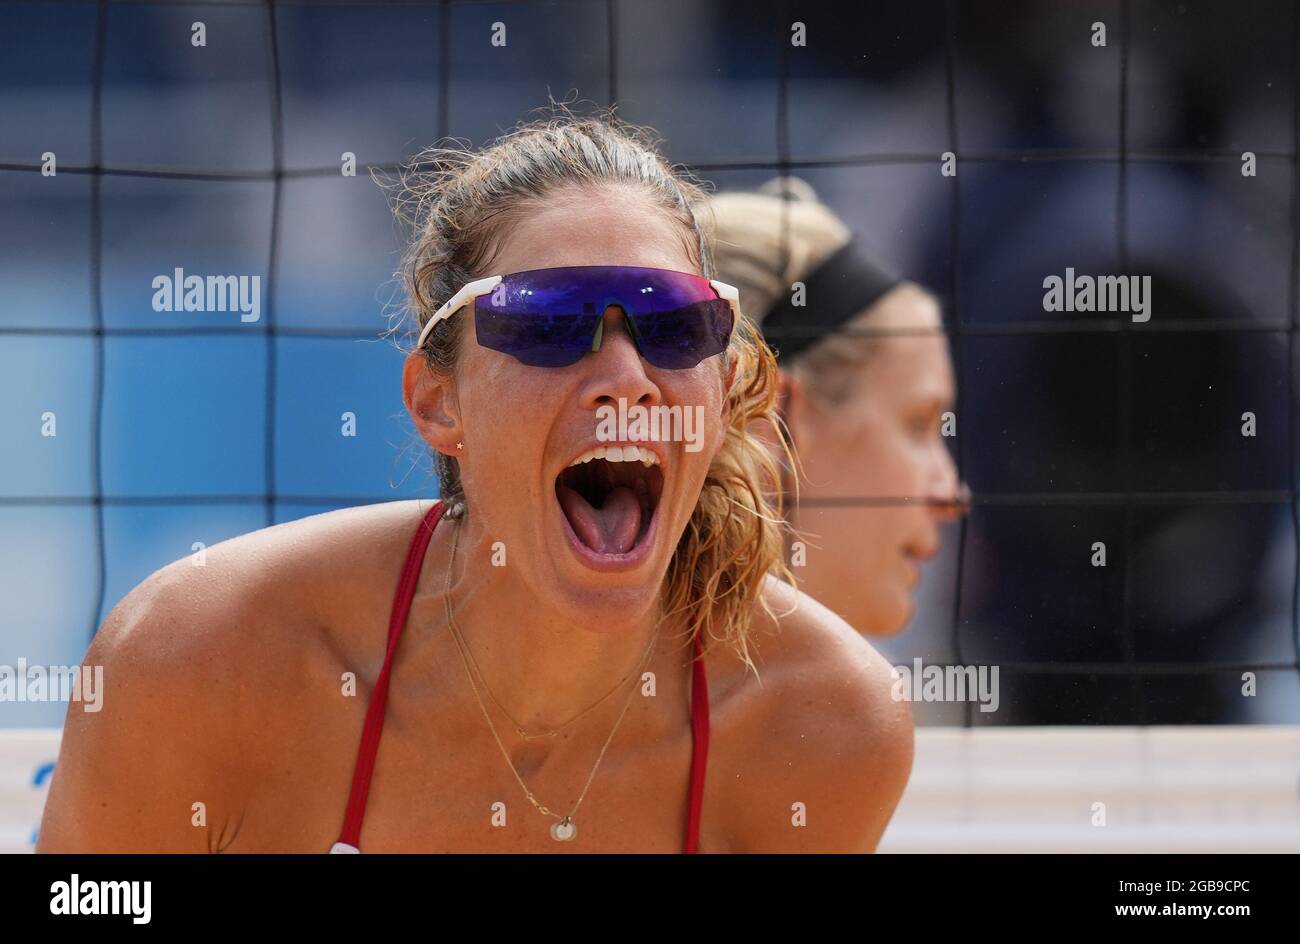 Tokyo, Japan. 3rd Aug, 2021. April Ross of the United States celebrates scoring during the women's quarterfinal match of beach volleyball between Germany's Laura Ludwig/Margareta Kozuch and April Ross/Alix Klineman of the United States at the Tokyo 2020 Olympic Games in Tokyo, Japan, Aug. 3, 2021. Credit: Li He/Xinhua/Alamy Live News Stock Photo